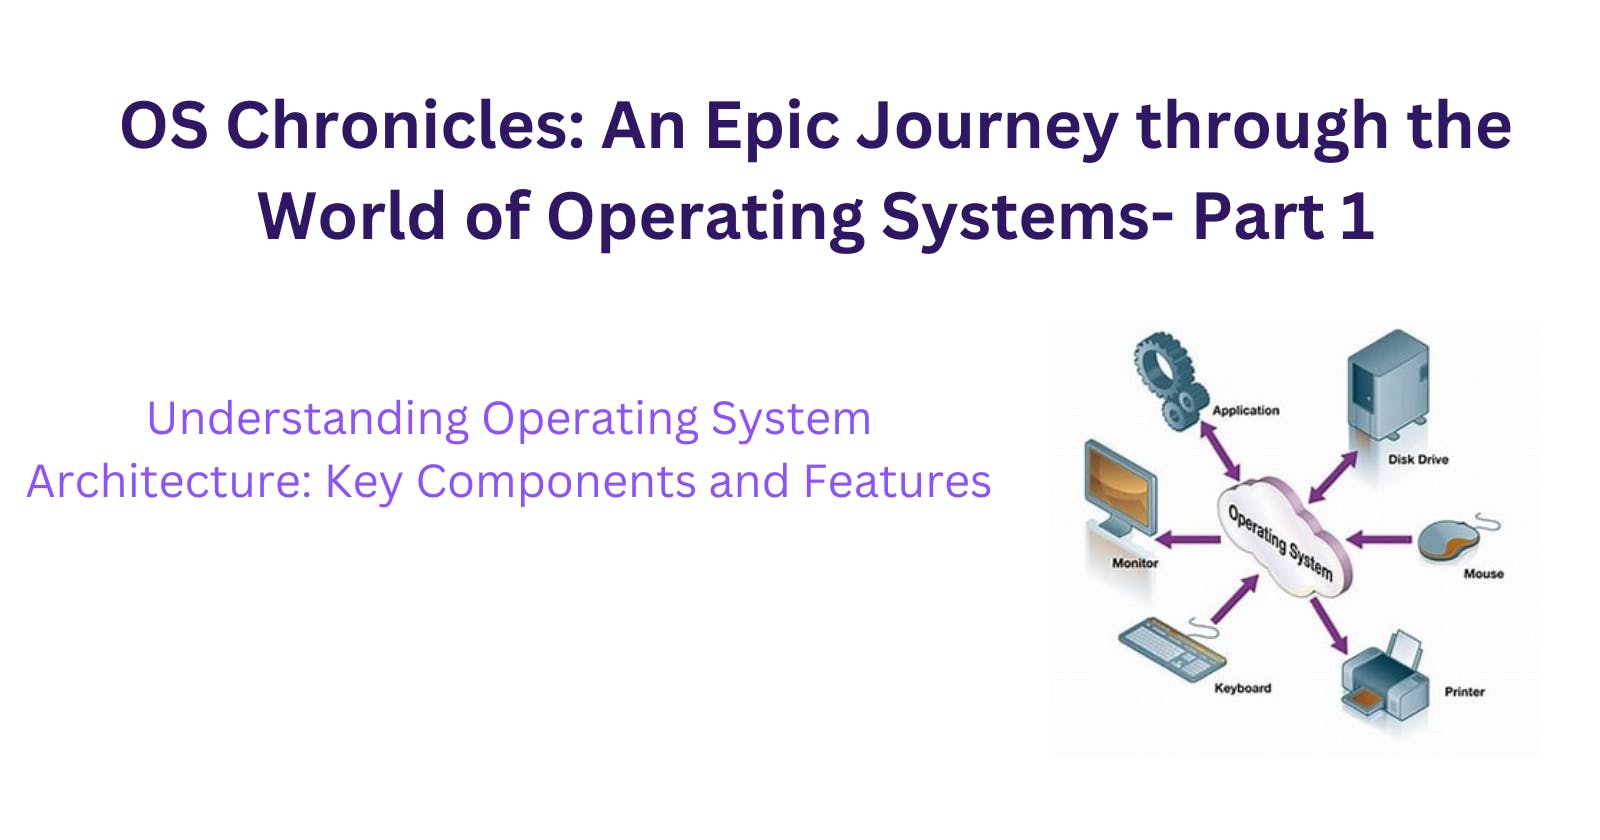 Understanding Operating System Architecture: Key Components and Features